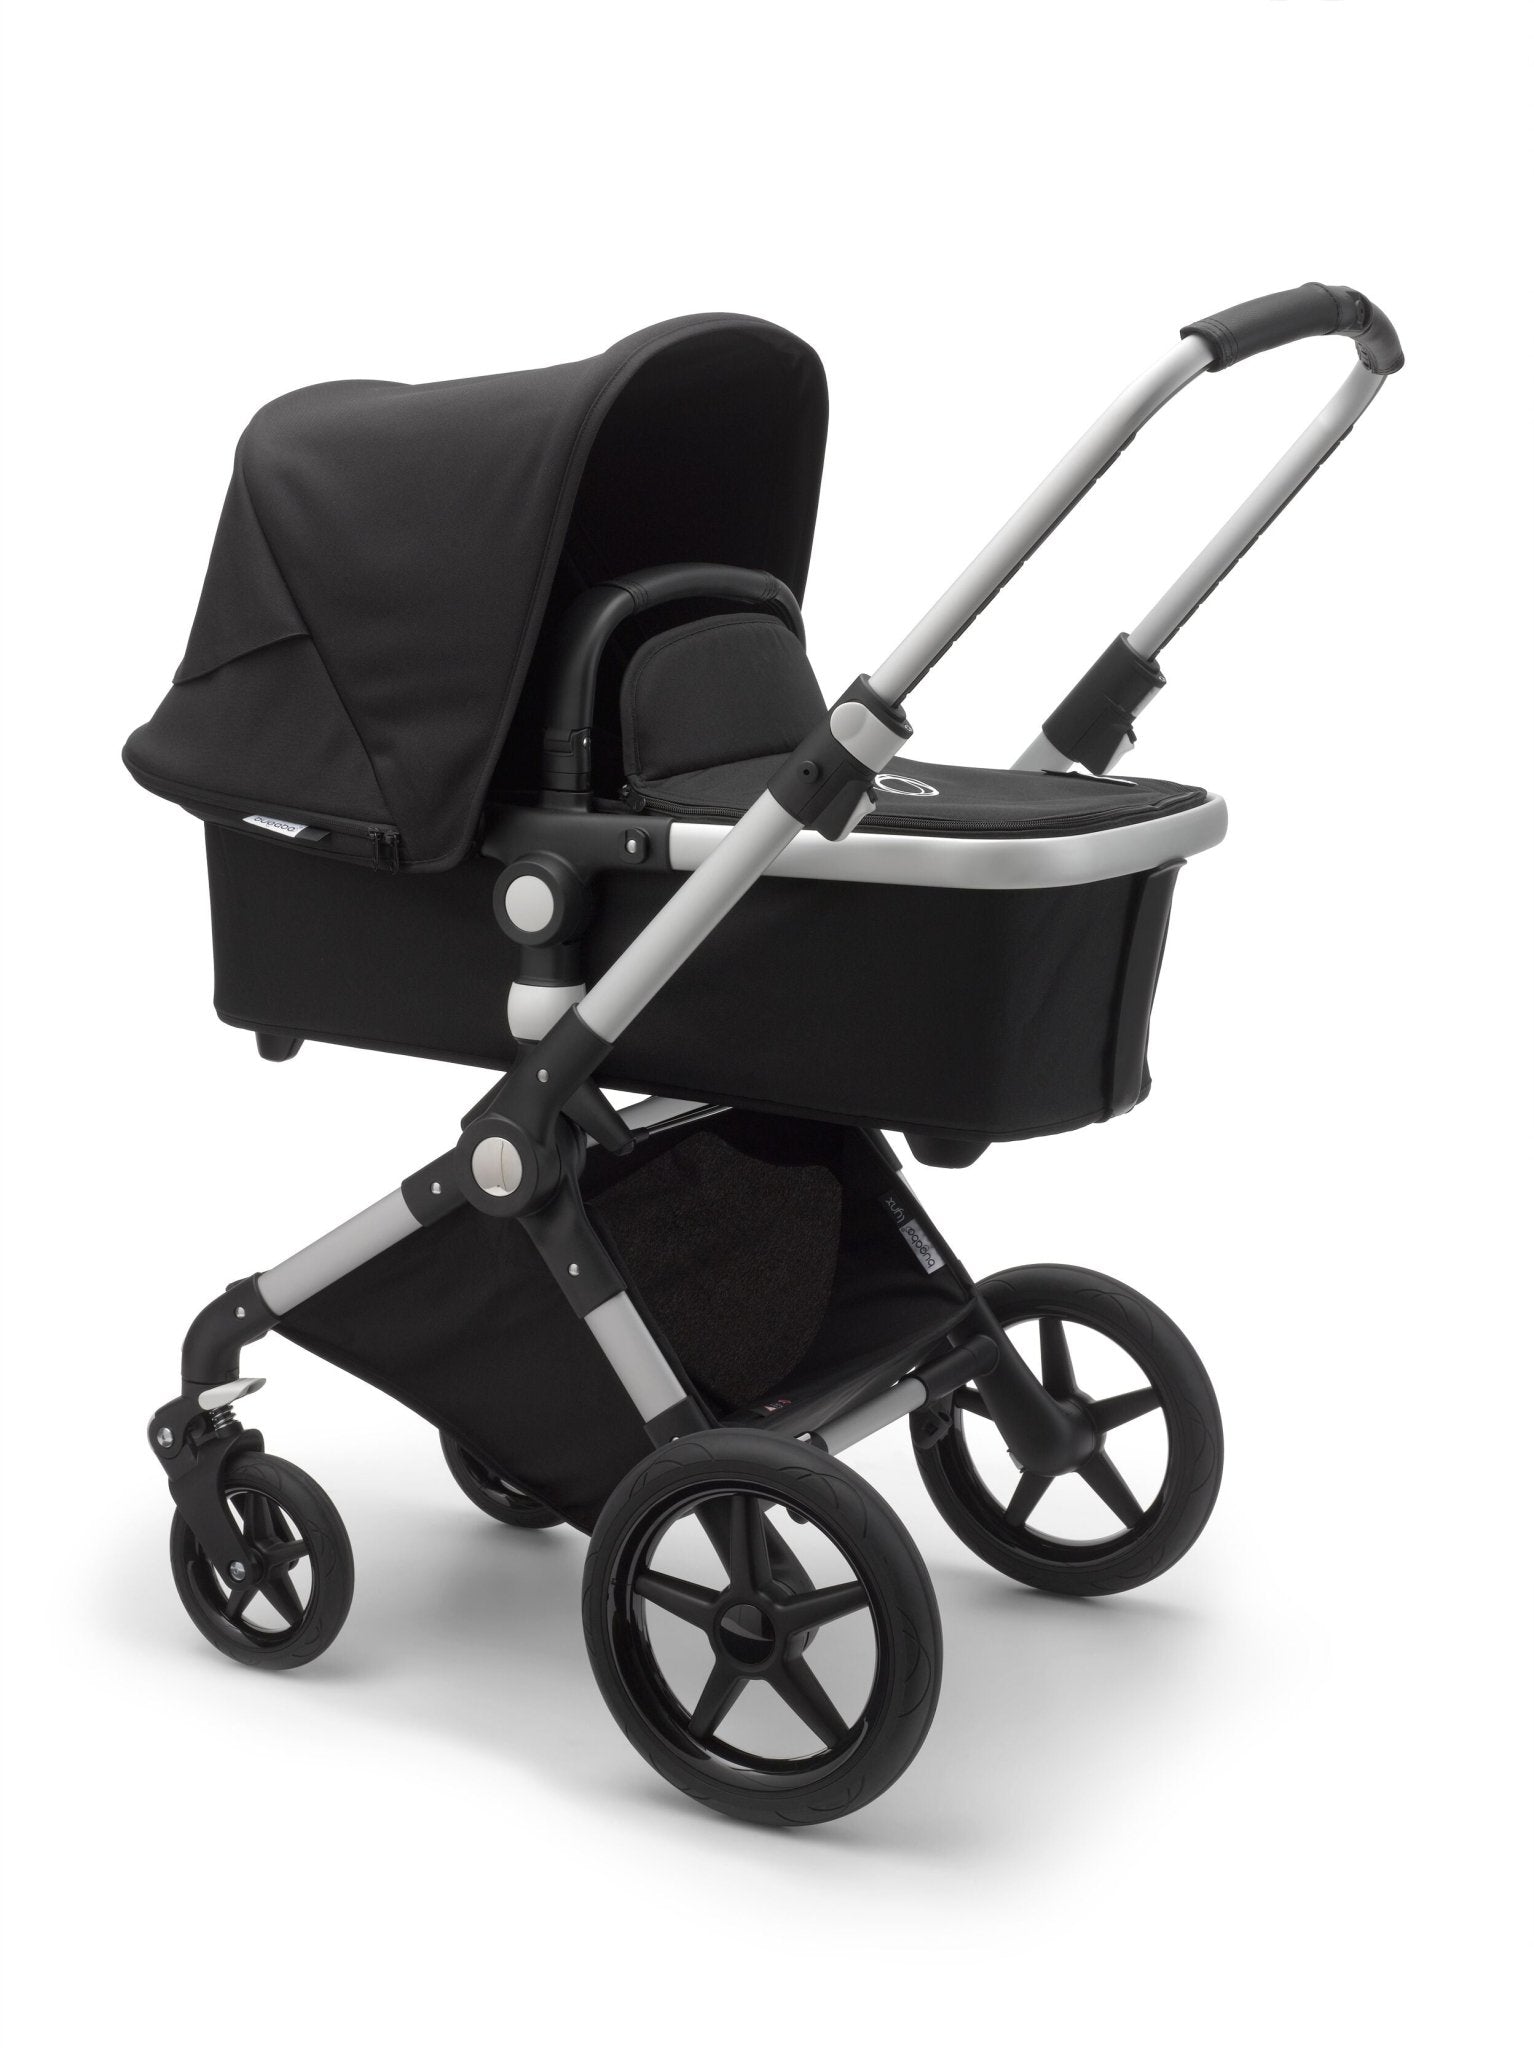 BUGABOO Lynx Baby Stroller Complete - ANB Baby -$500 - $1000